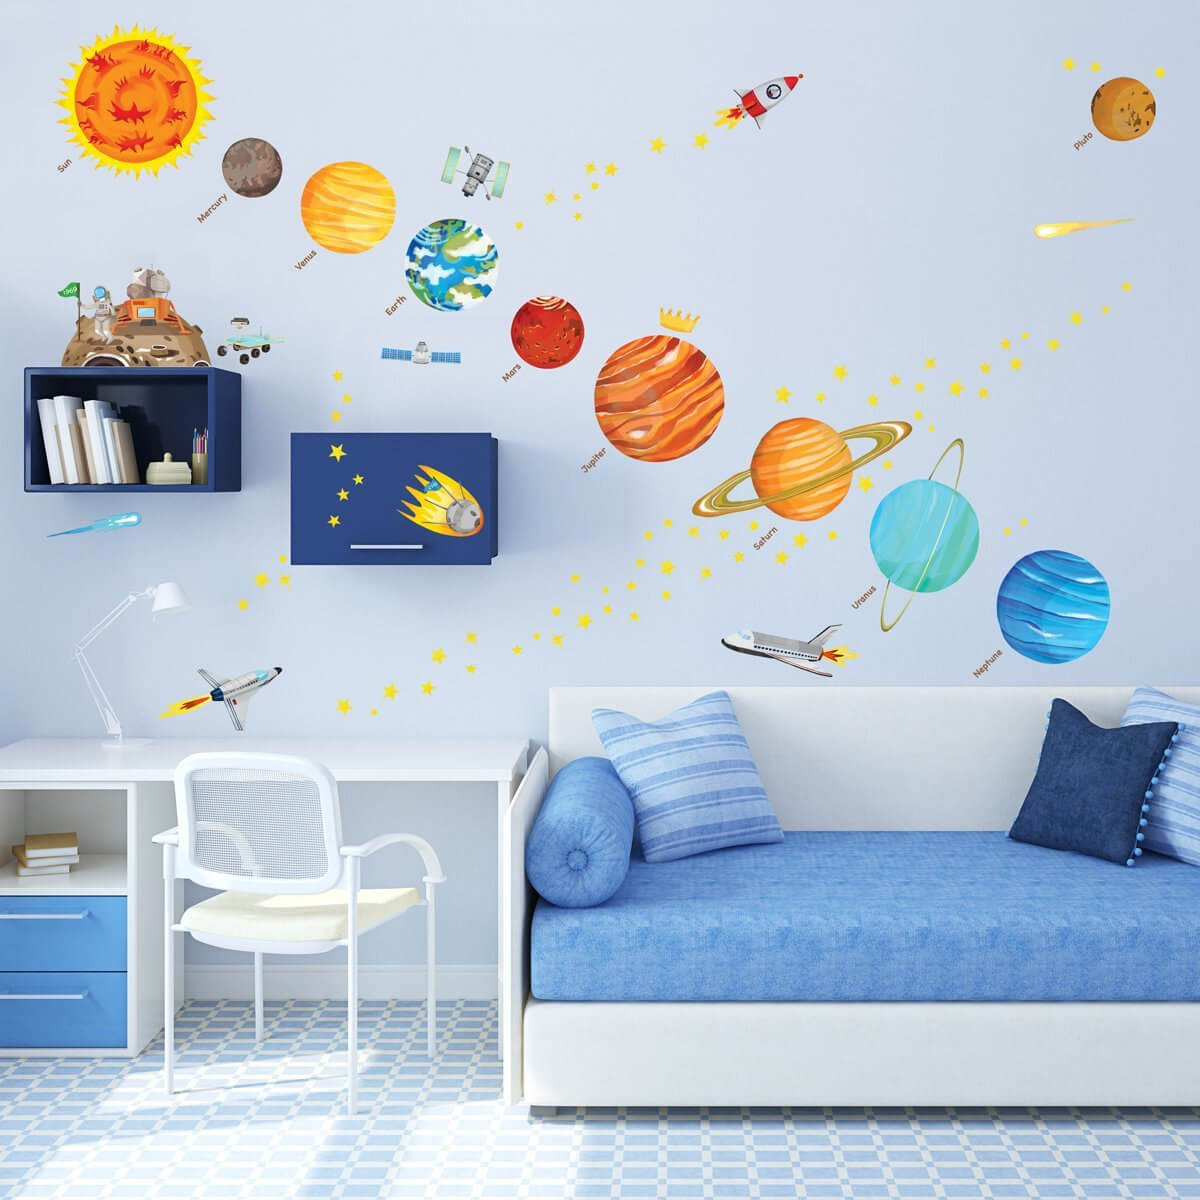 Decals For Kids Room
 These Educational Wall Ideas are Perfect for Kids